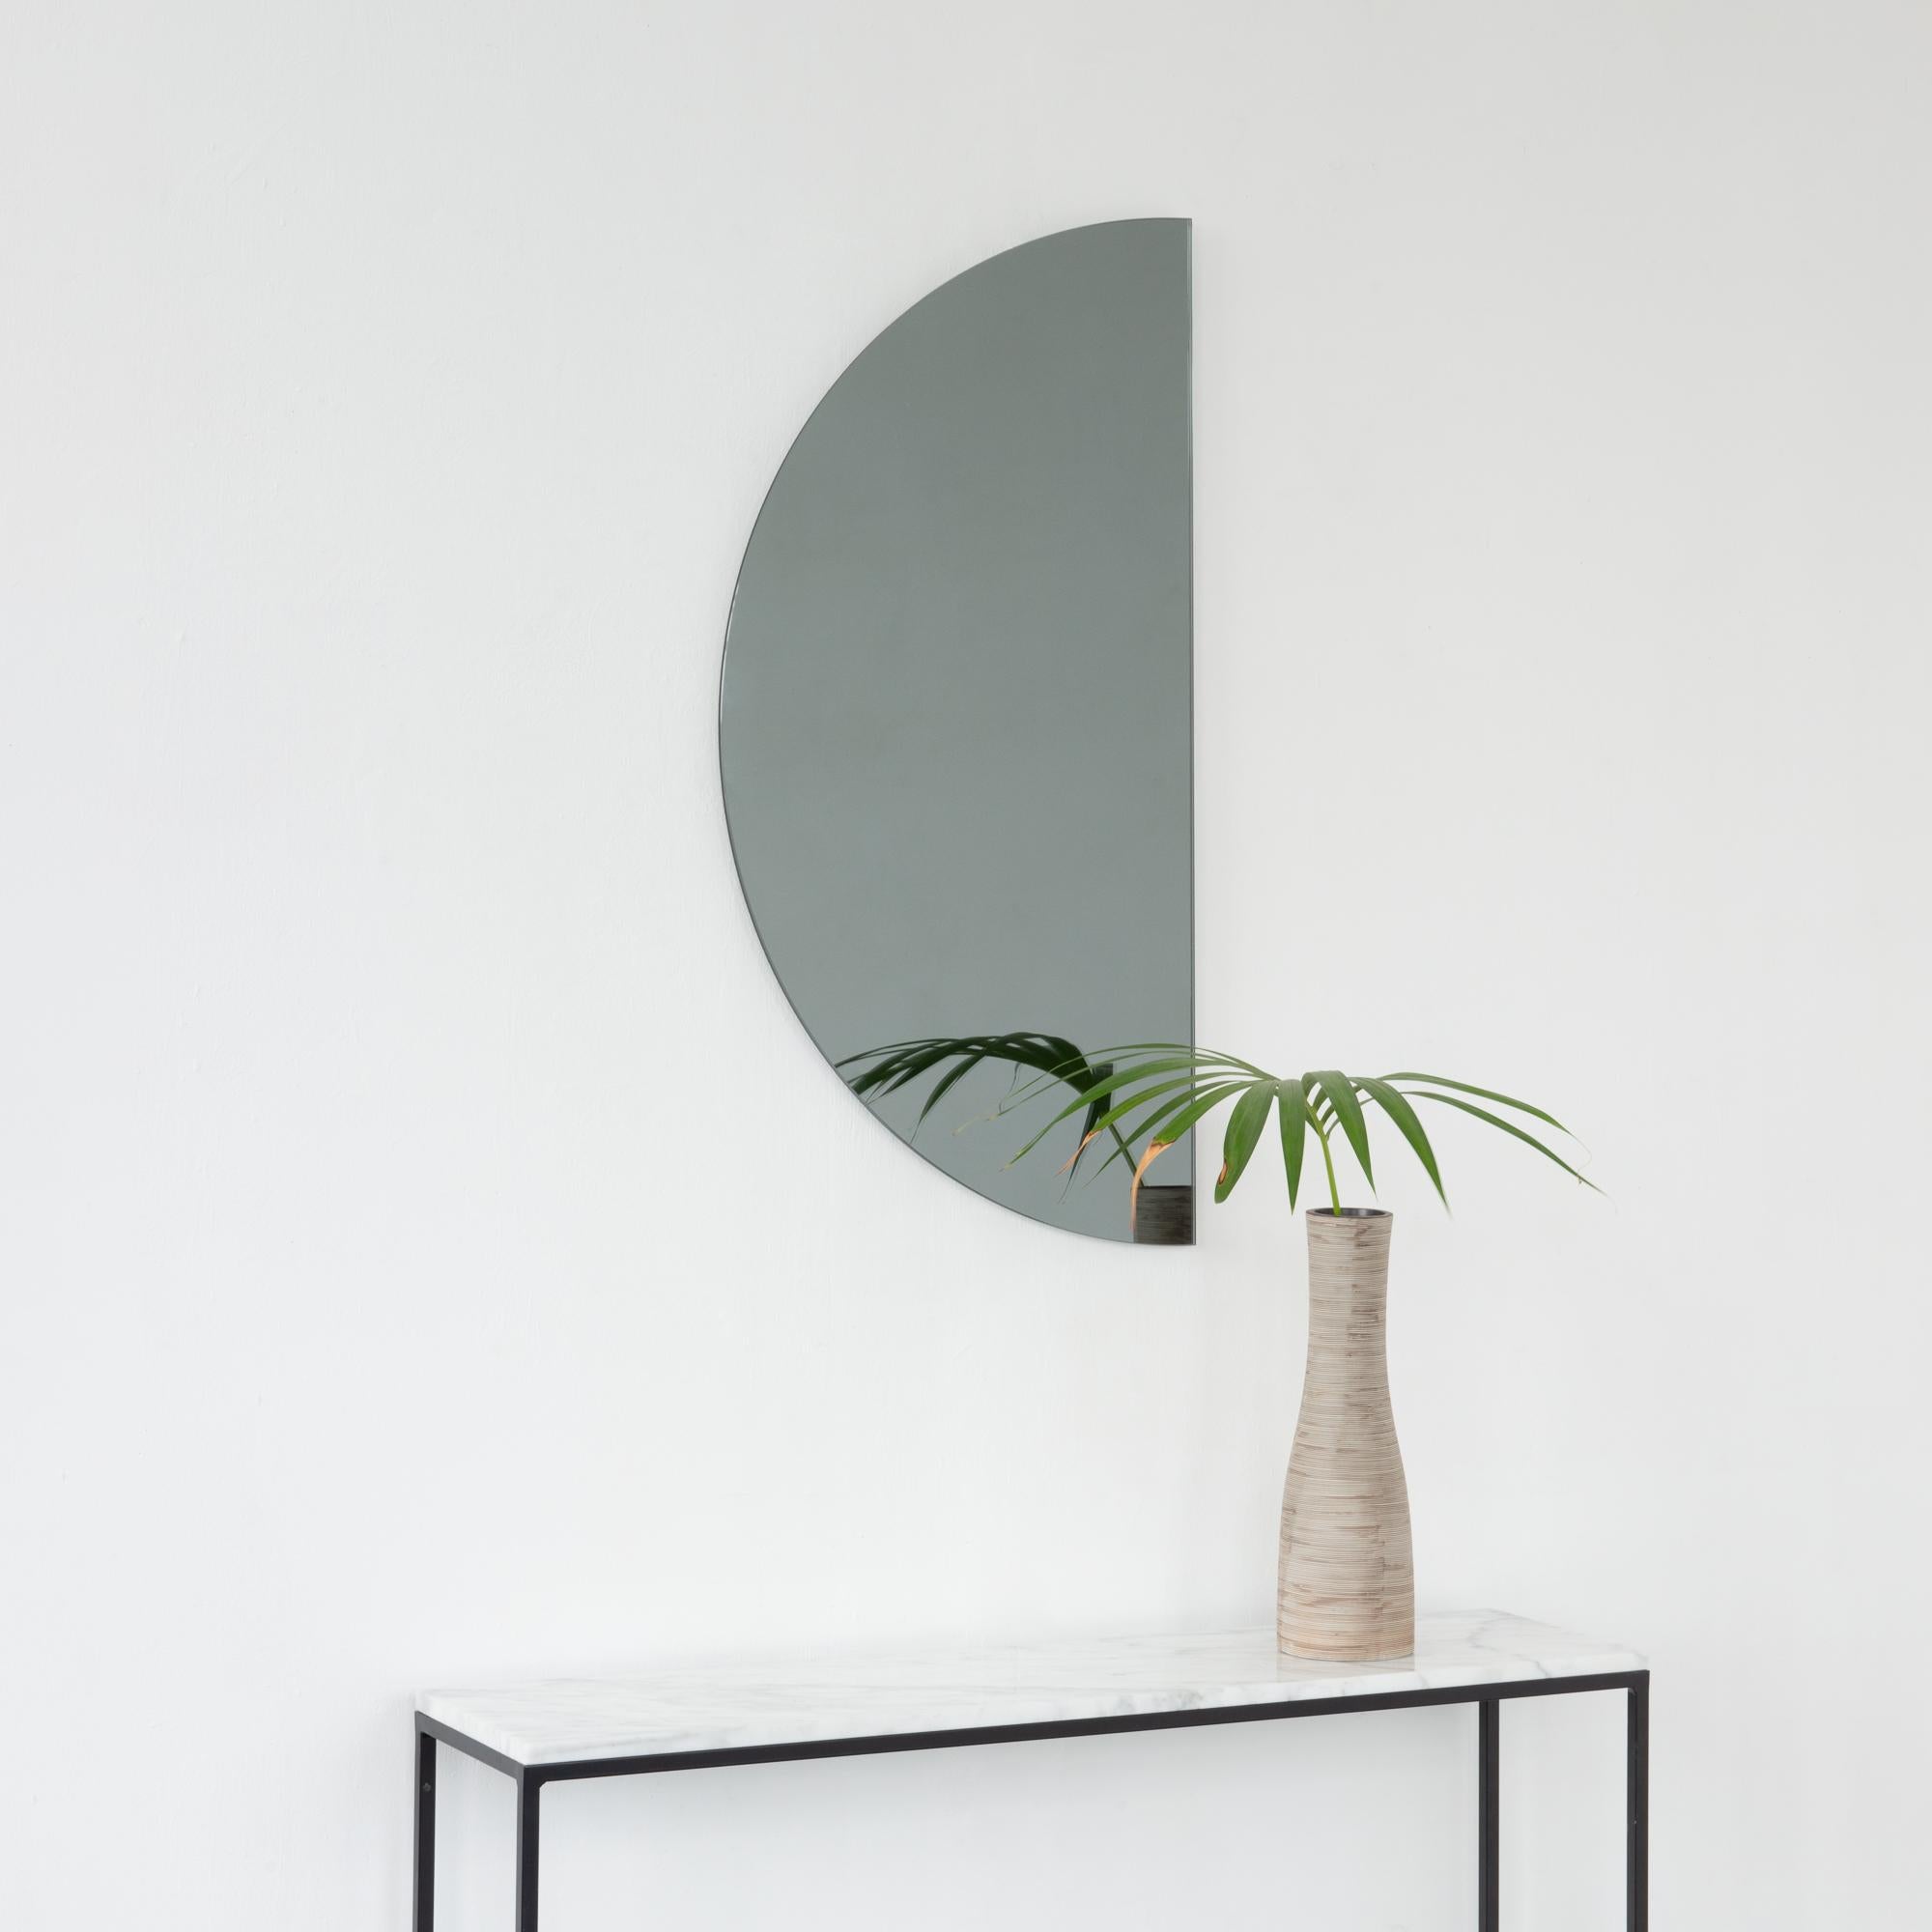 Minimalist half-moon Luna™ black tinted frameless mirror with a floating effect. Fitted with a quality hanging system for a flexible installation in 4 different directions. Designed and made in London, UK. 

Our mirrors are designed with an